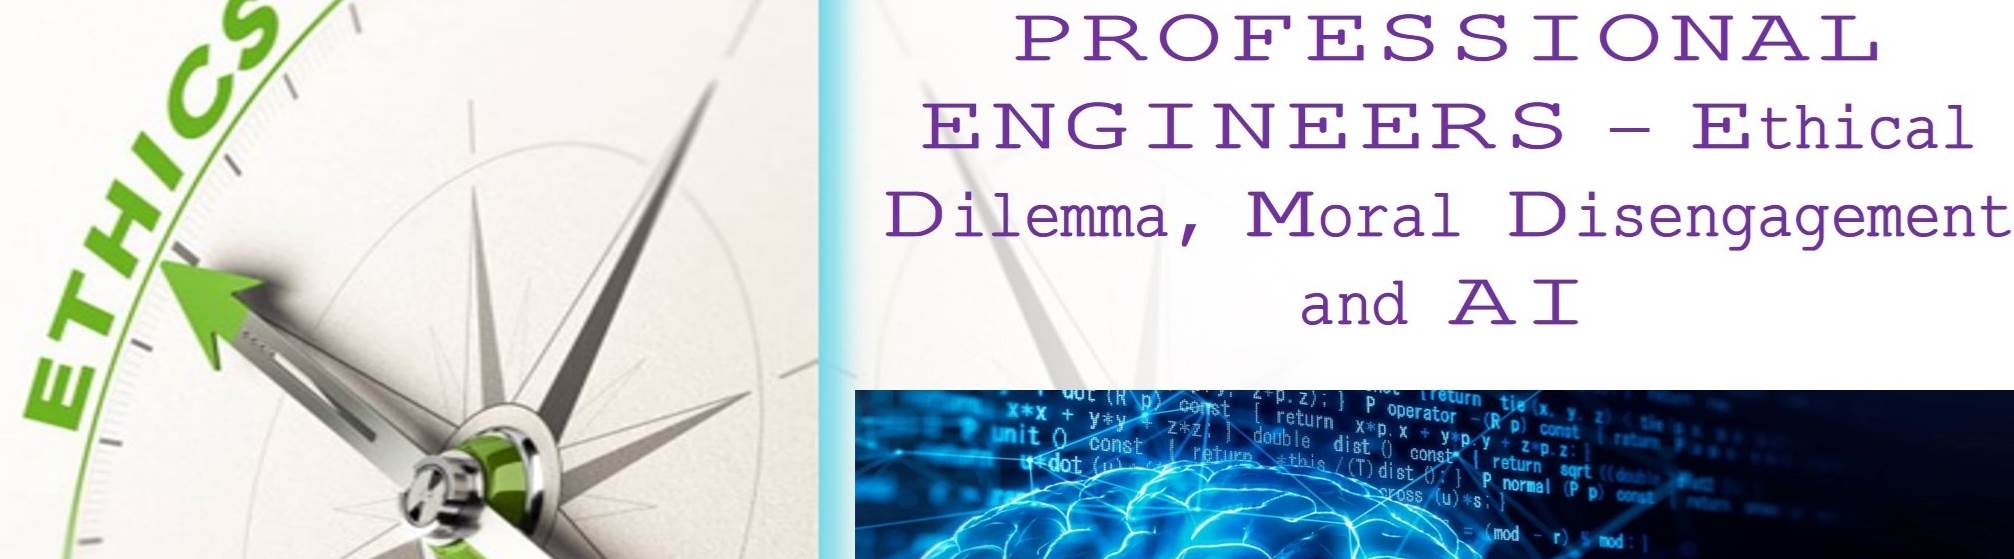 ENGINEERING ETHICS FOR PROFESSIONAL ENGINEERS – Ethical Dilemma, Moral Disengagement and AI, 2.5-PDH - An On-Demand Course.